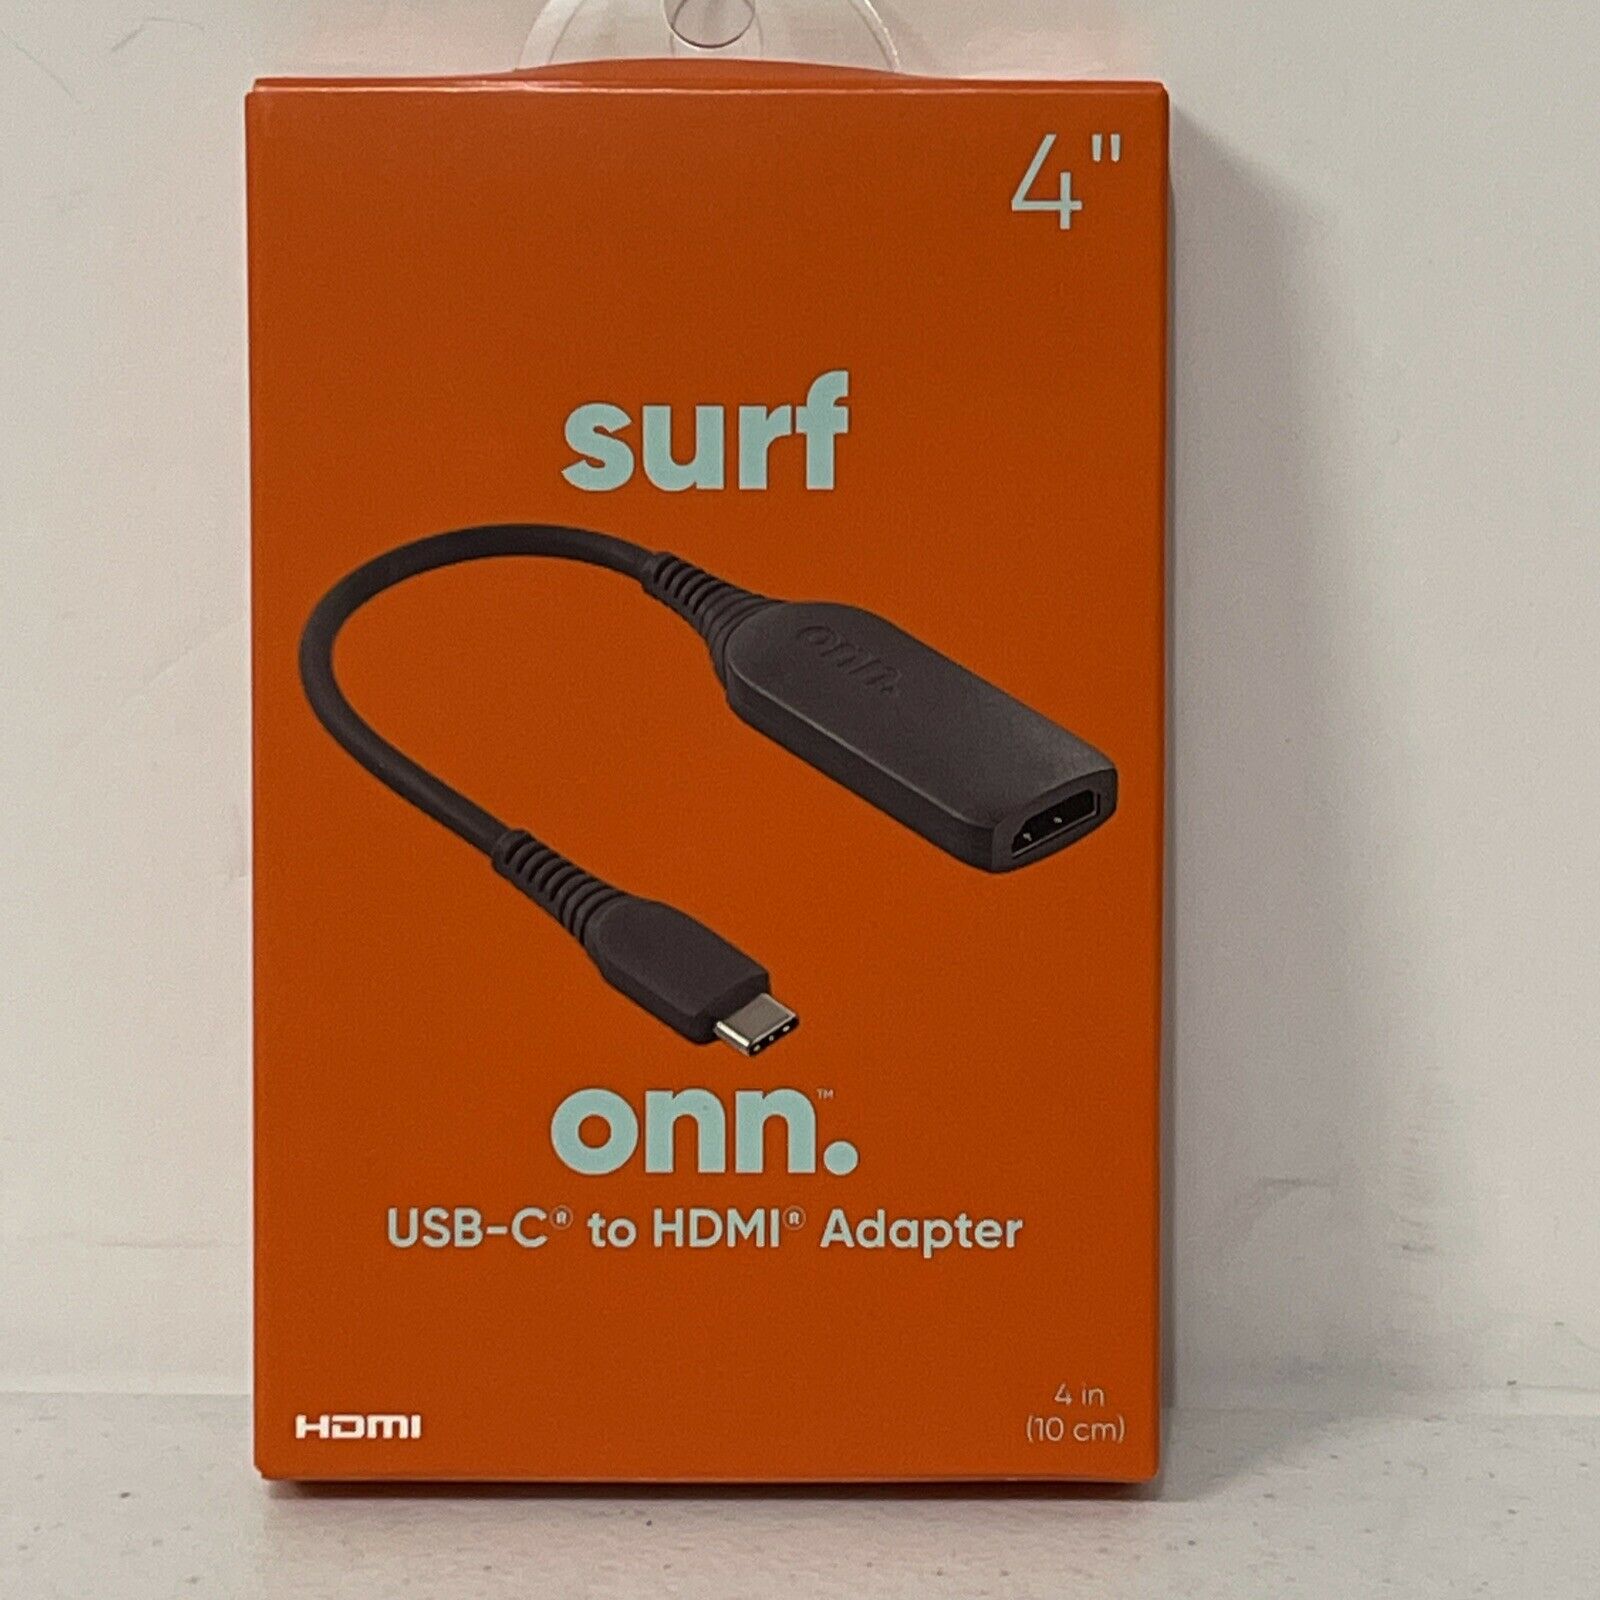 Surf Onn USB-C To HDMI Adapter